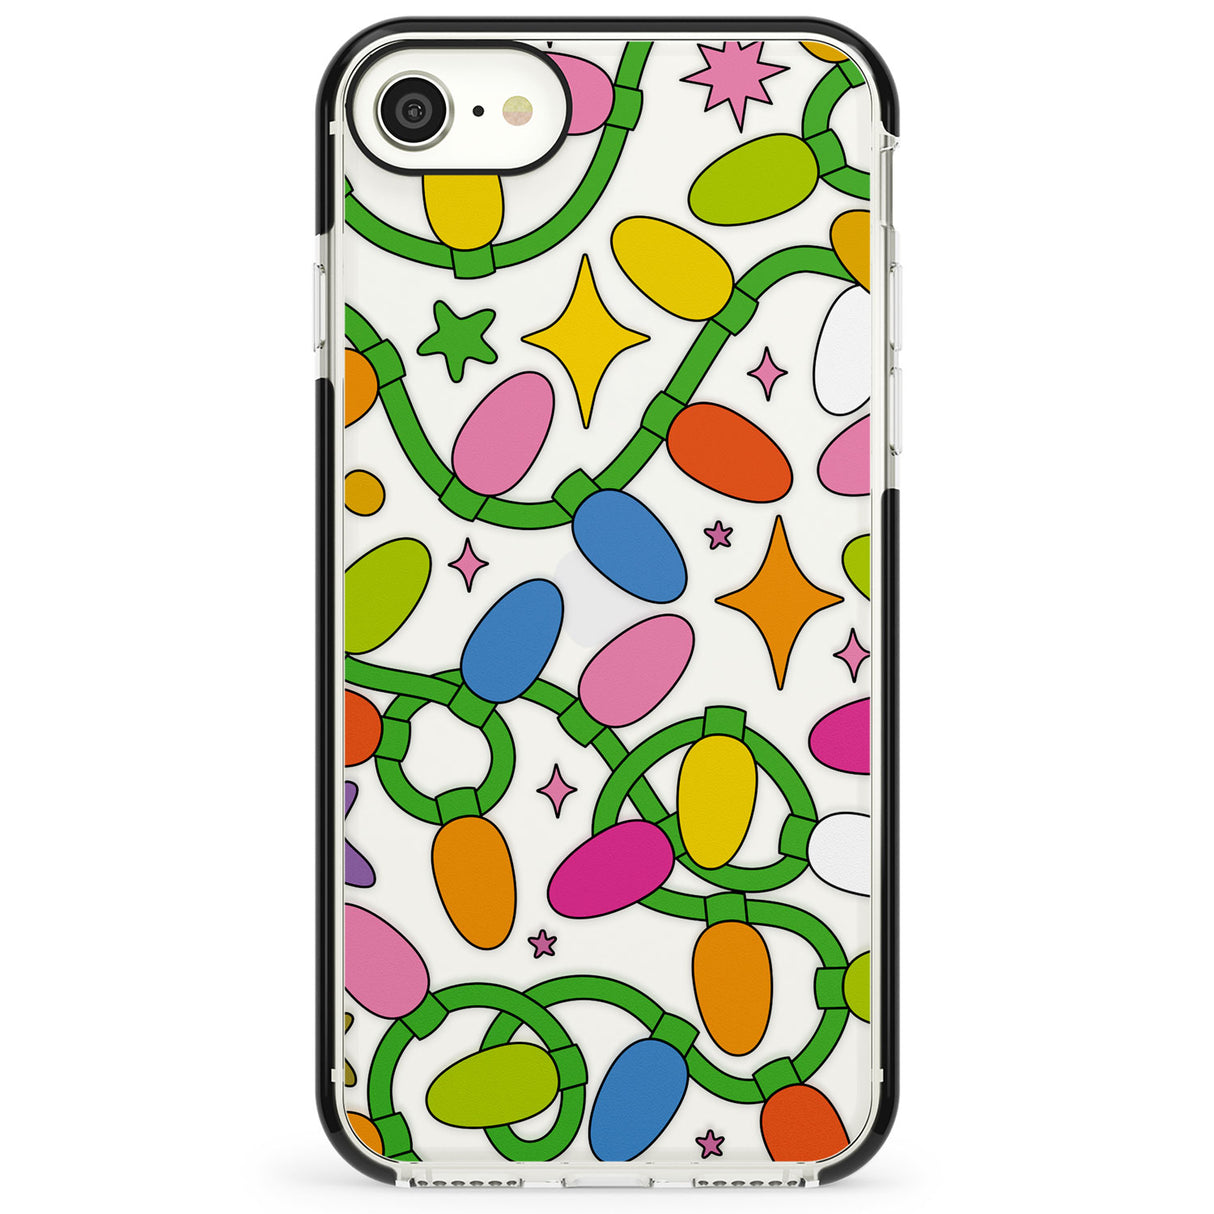 Festive Lights Pattern Impact Phone Case for iPhone SE